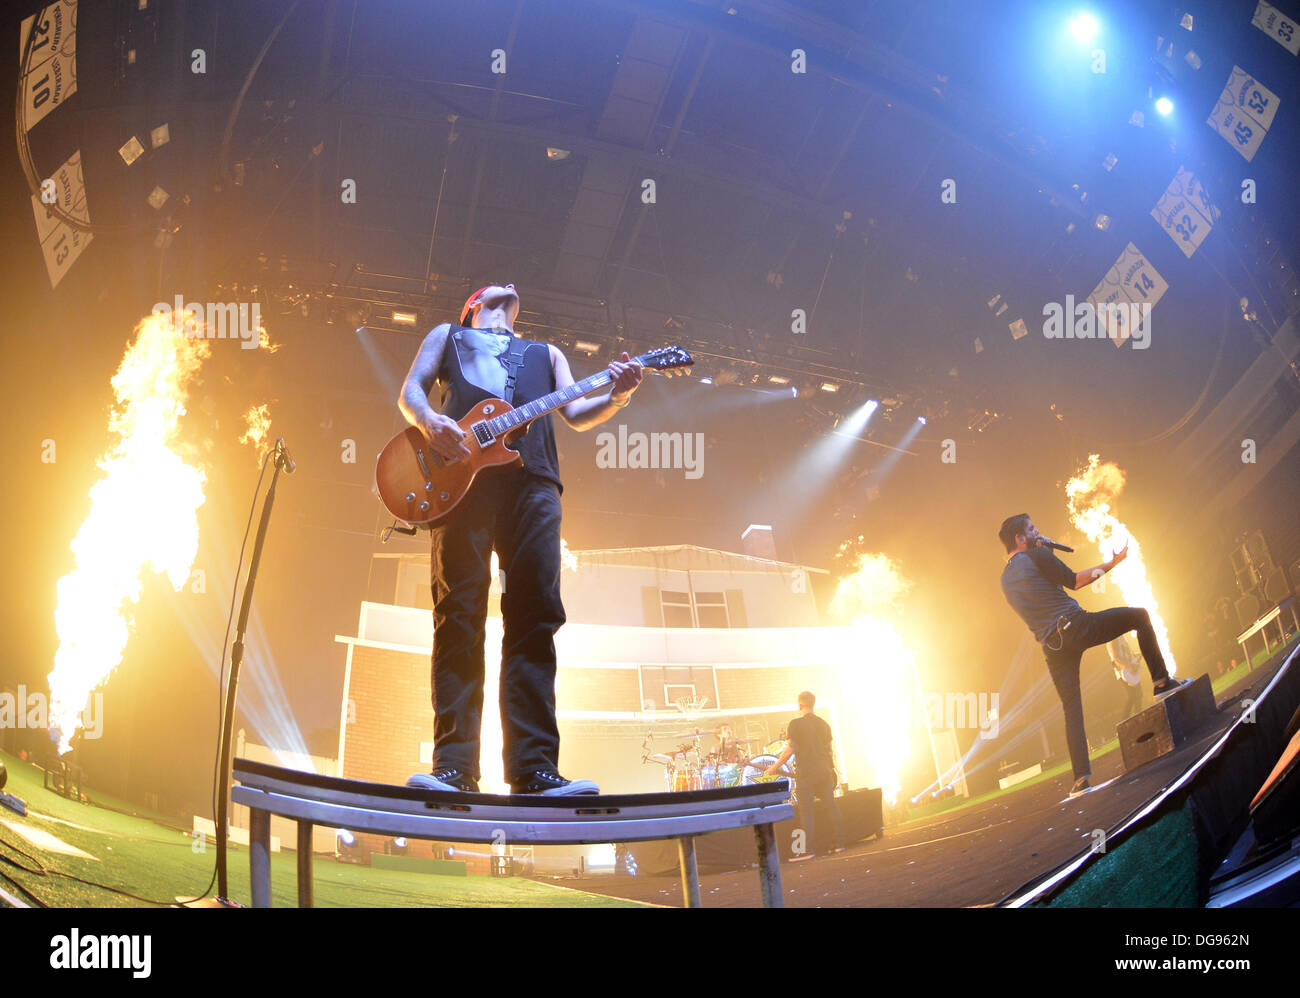 Norfolk, Virginia, USA. 14th Oct, 2013. Lead guitarist KEVIN SKAFF of 'A Day To Remember' performs during the House Party Tour at the Constant Center Old Dominion University. © Jeff Moore/ZUMA Wire/ZUMAPRESS.com/Alamy Live News Stock Photo